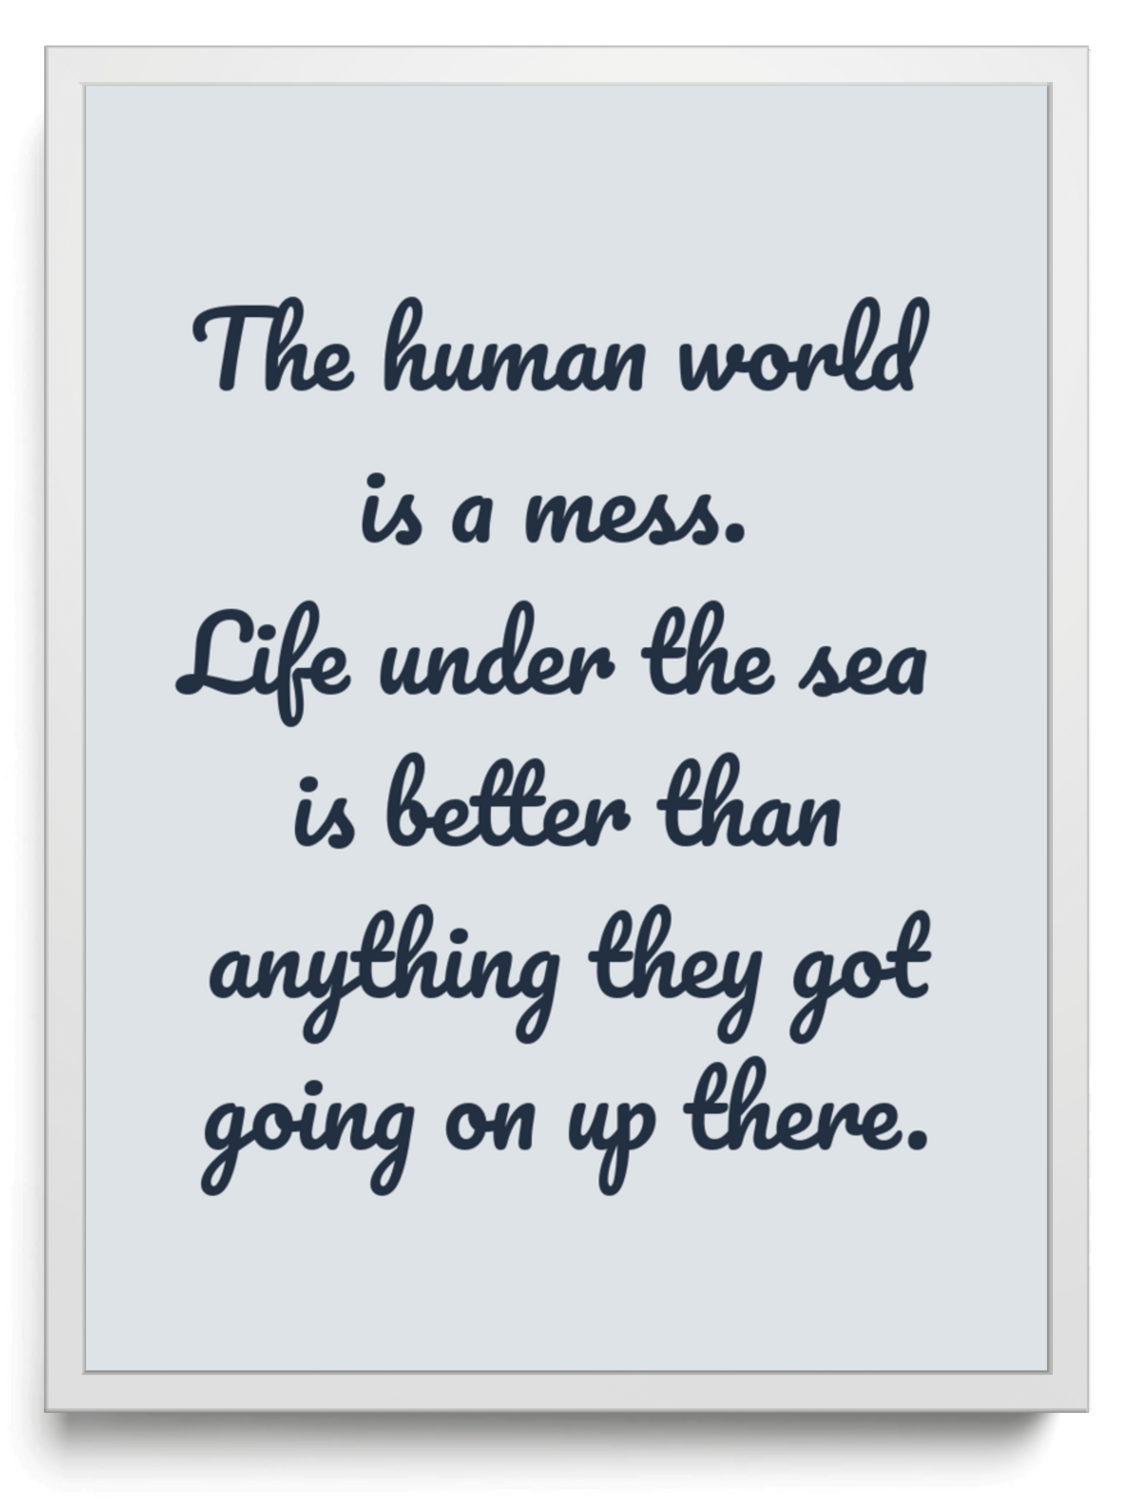 The human world is a mess. Life under the sea is better than anything they got going on up there. framed typographic print